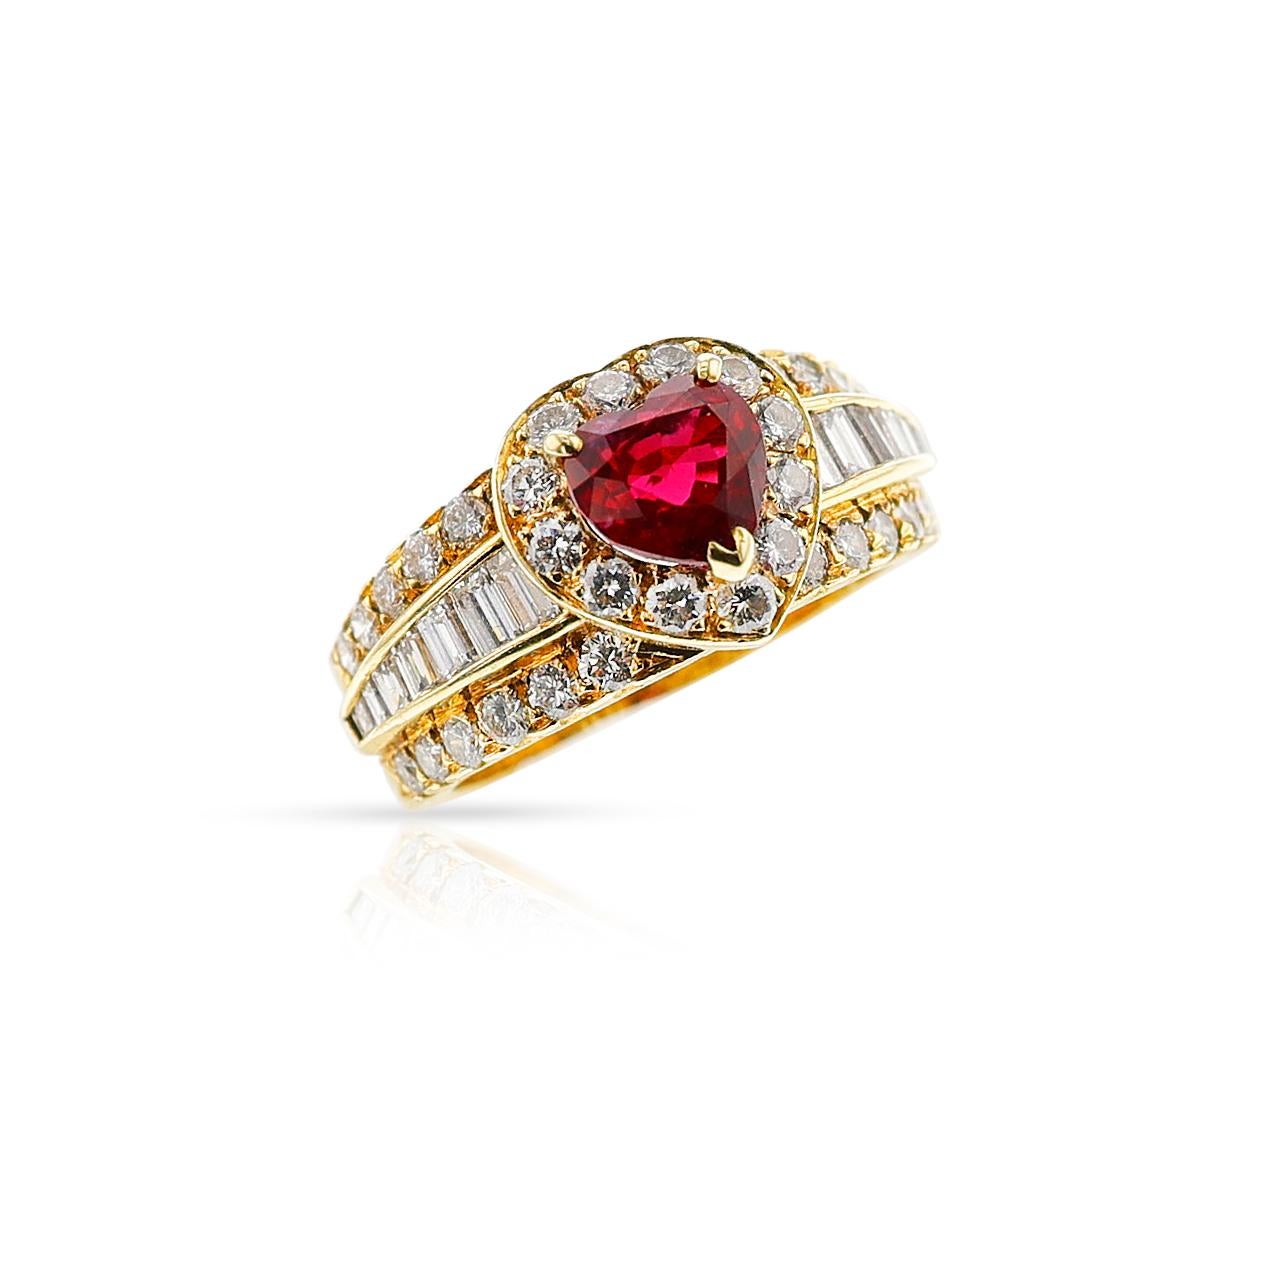 A stunning Van Cleef & Arpels GIA Certified No Heat Pigeon Blood Heart Shaped Burma Ruby Ring made in 18k Yellow Gold. The Ruby weighs 1.58 carats and the Diamonds weigh appx. 1.50 carats. The color is appx. F and the clarity is appx. VS. The ring